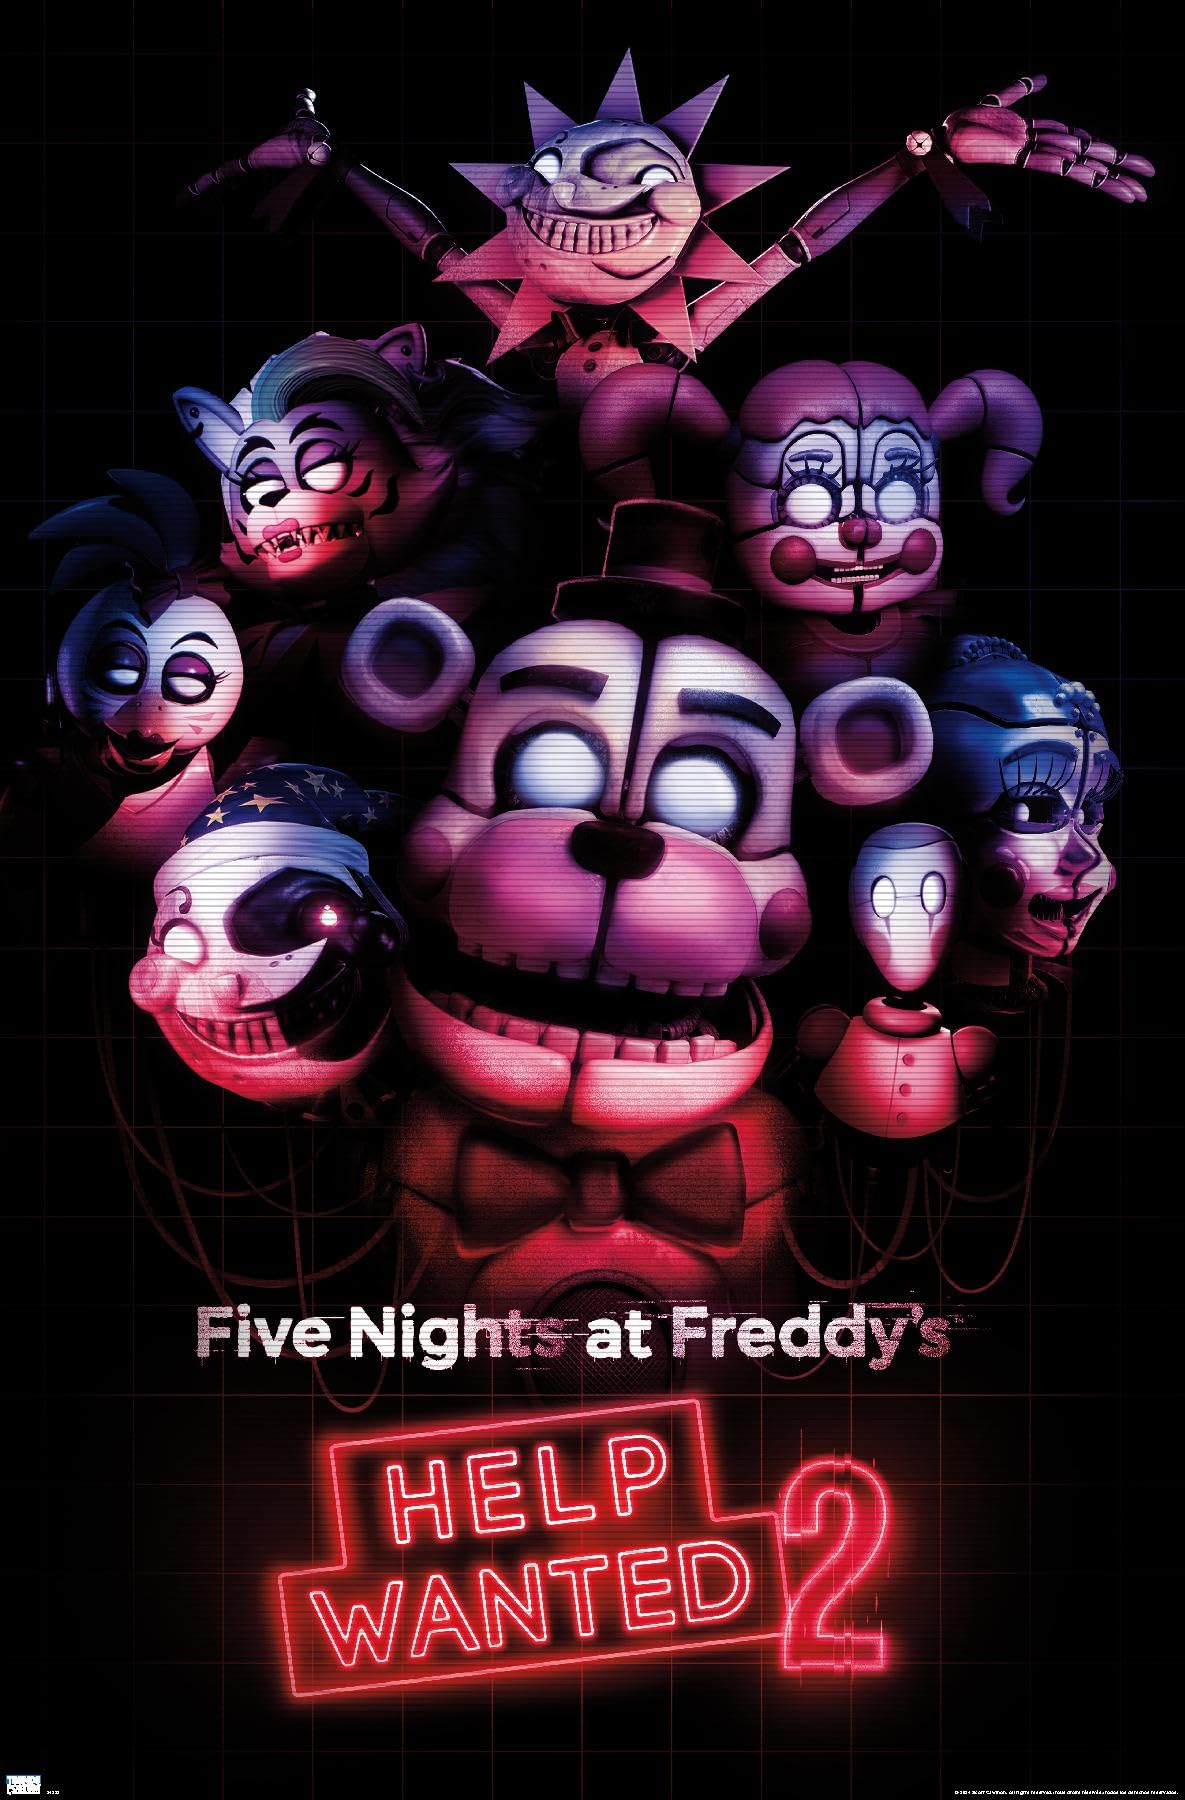 Trends International Five Nights at Freddy's: Help Wanted 2 - Key Art Wall Poster